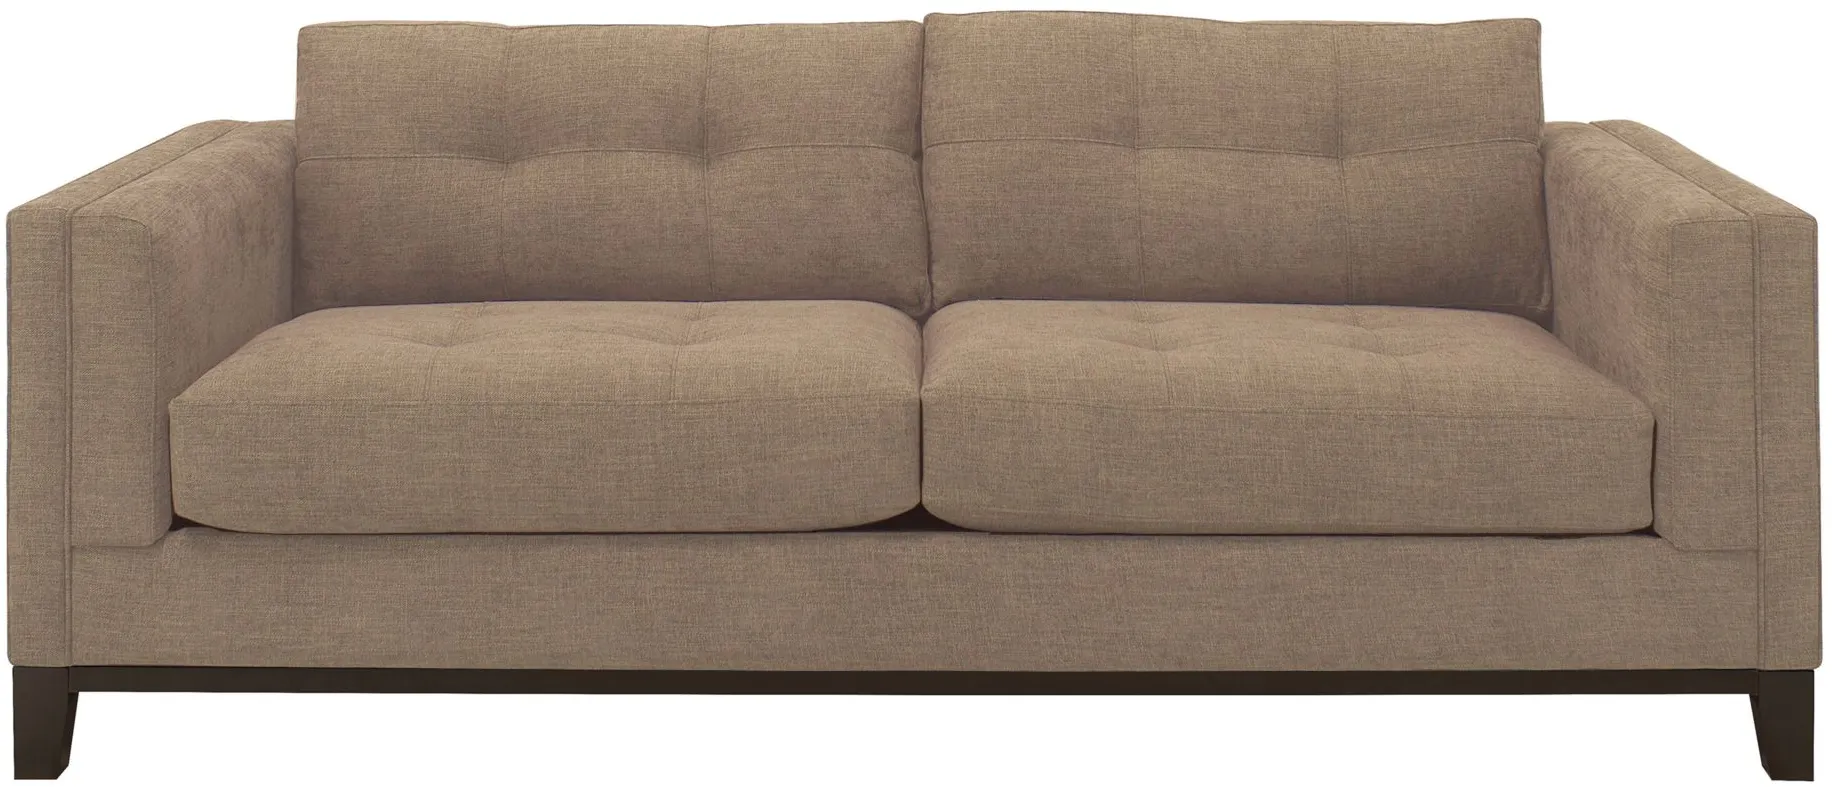 Mirasol Sofa in Suede so Soft Mineral by H.M. Richards